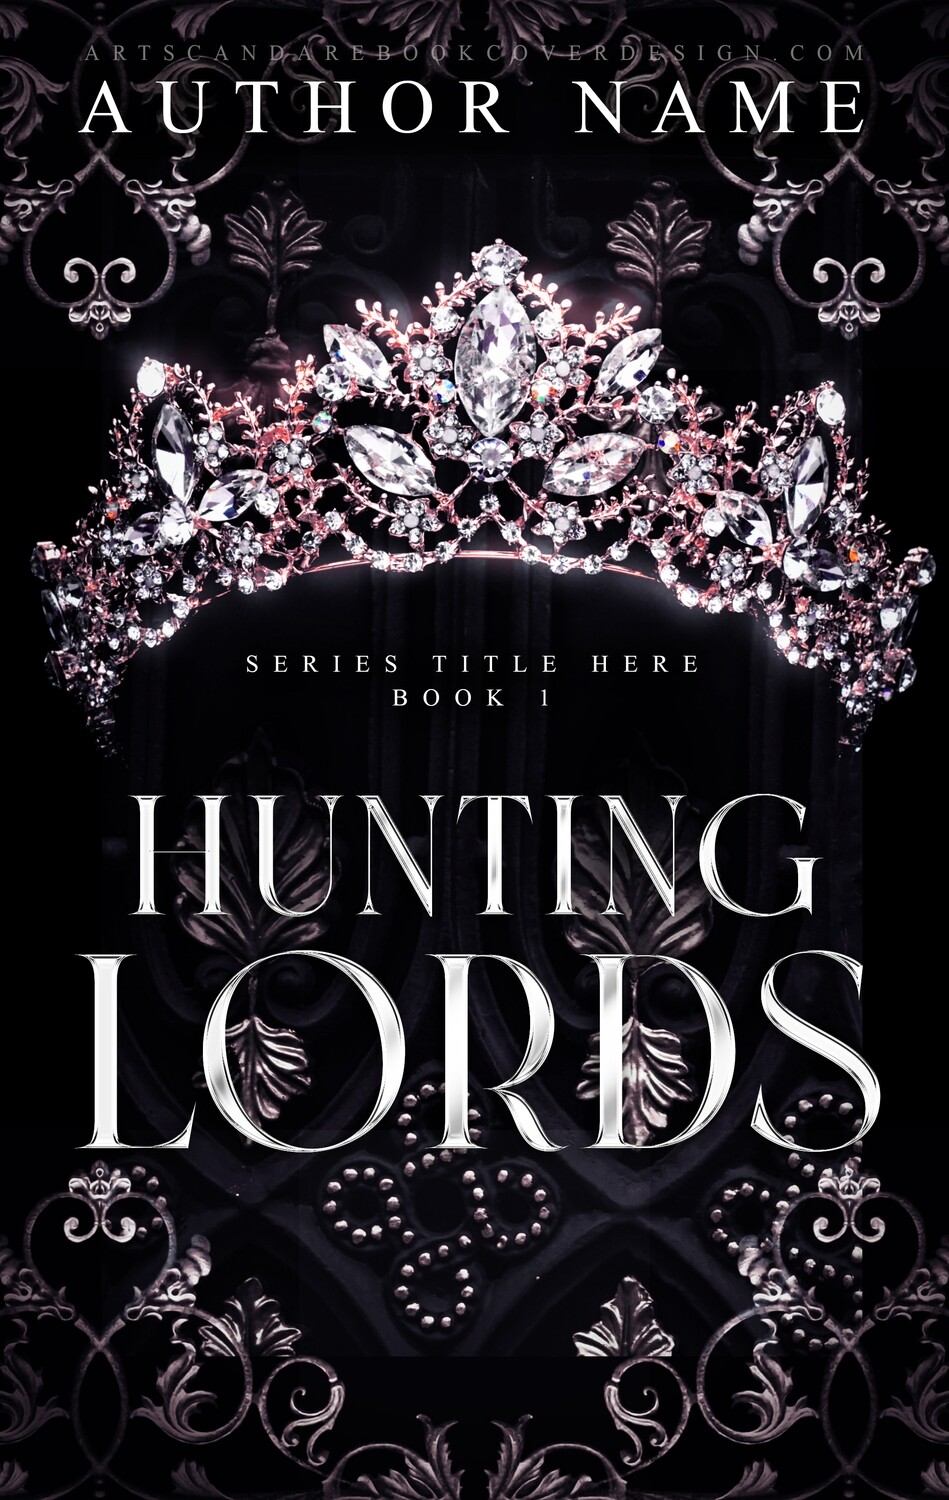 HUNTING LORDS